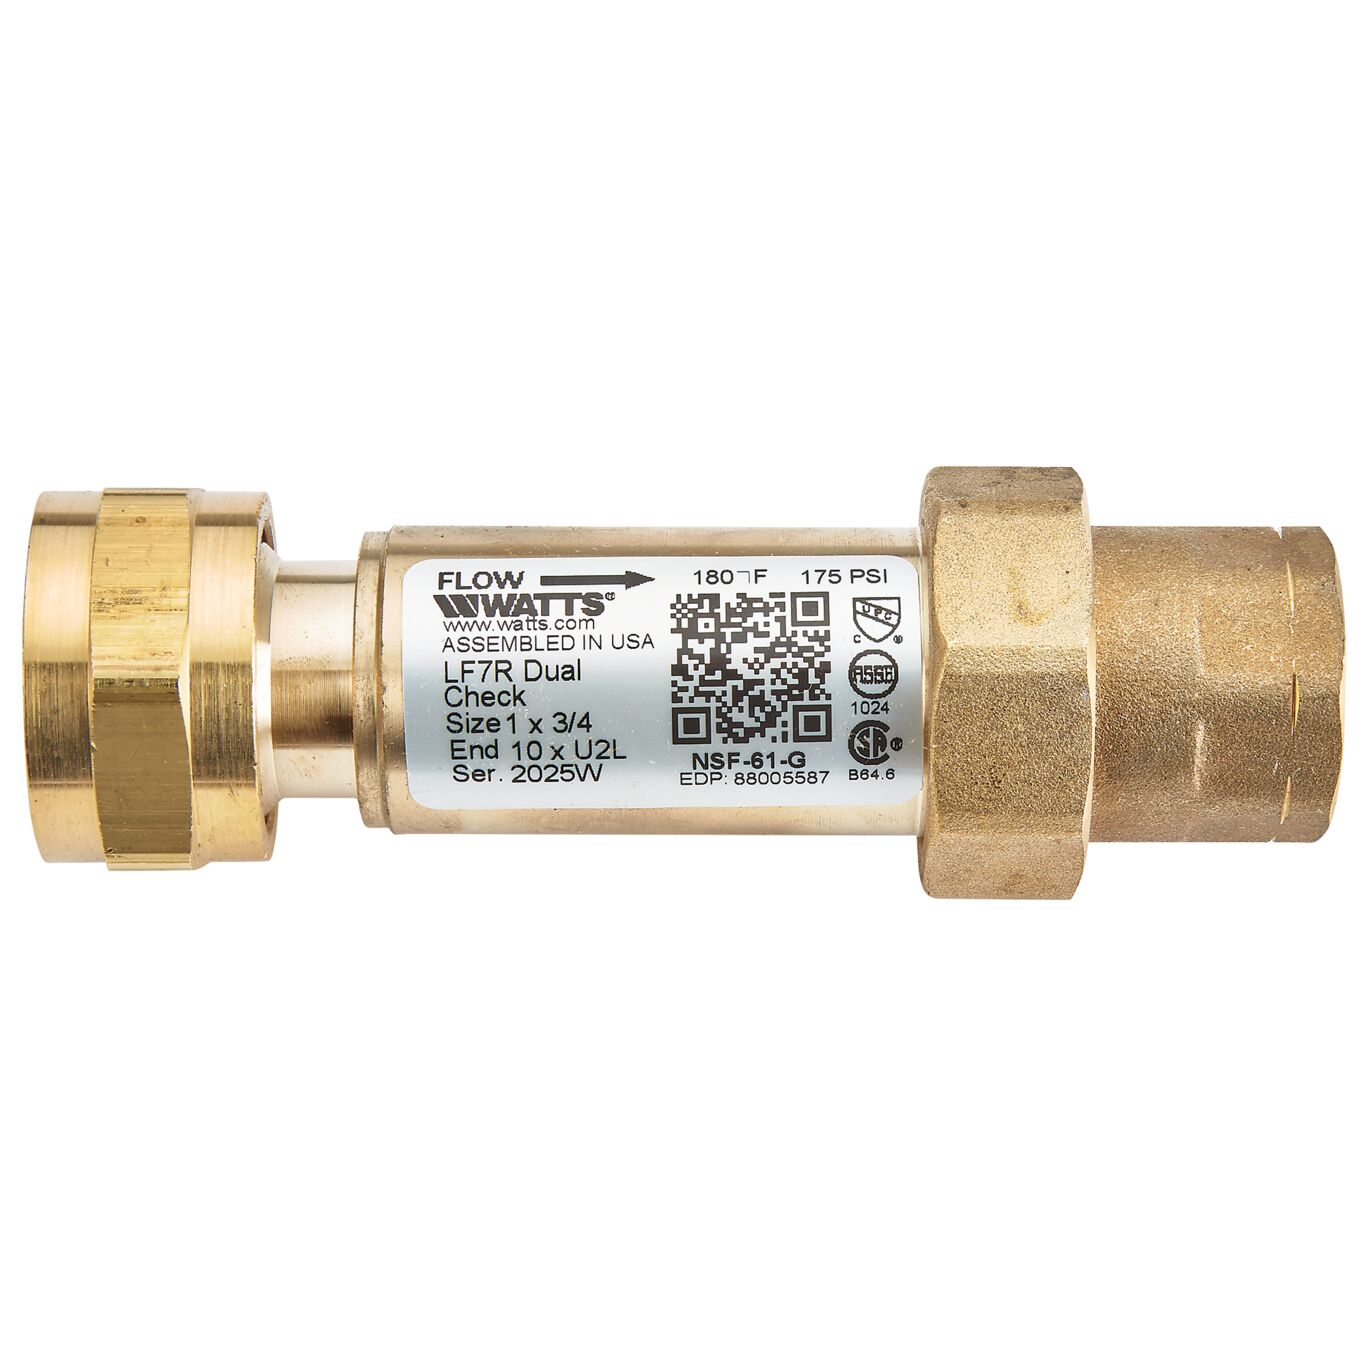 Product image 1 X 3/4 IN Lead Free Residential Dual Check Valve, Female Meter Thread Swivel Inlet X Longer Length Union Female NPT Outlet